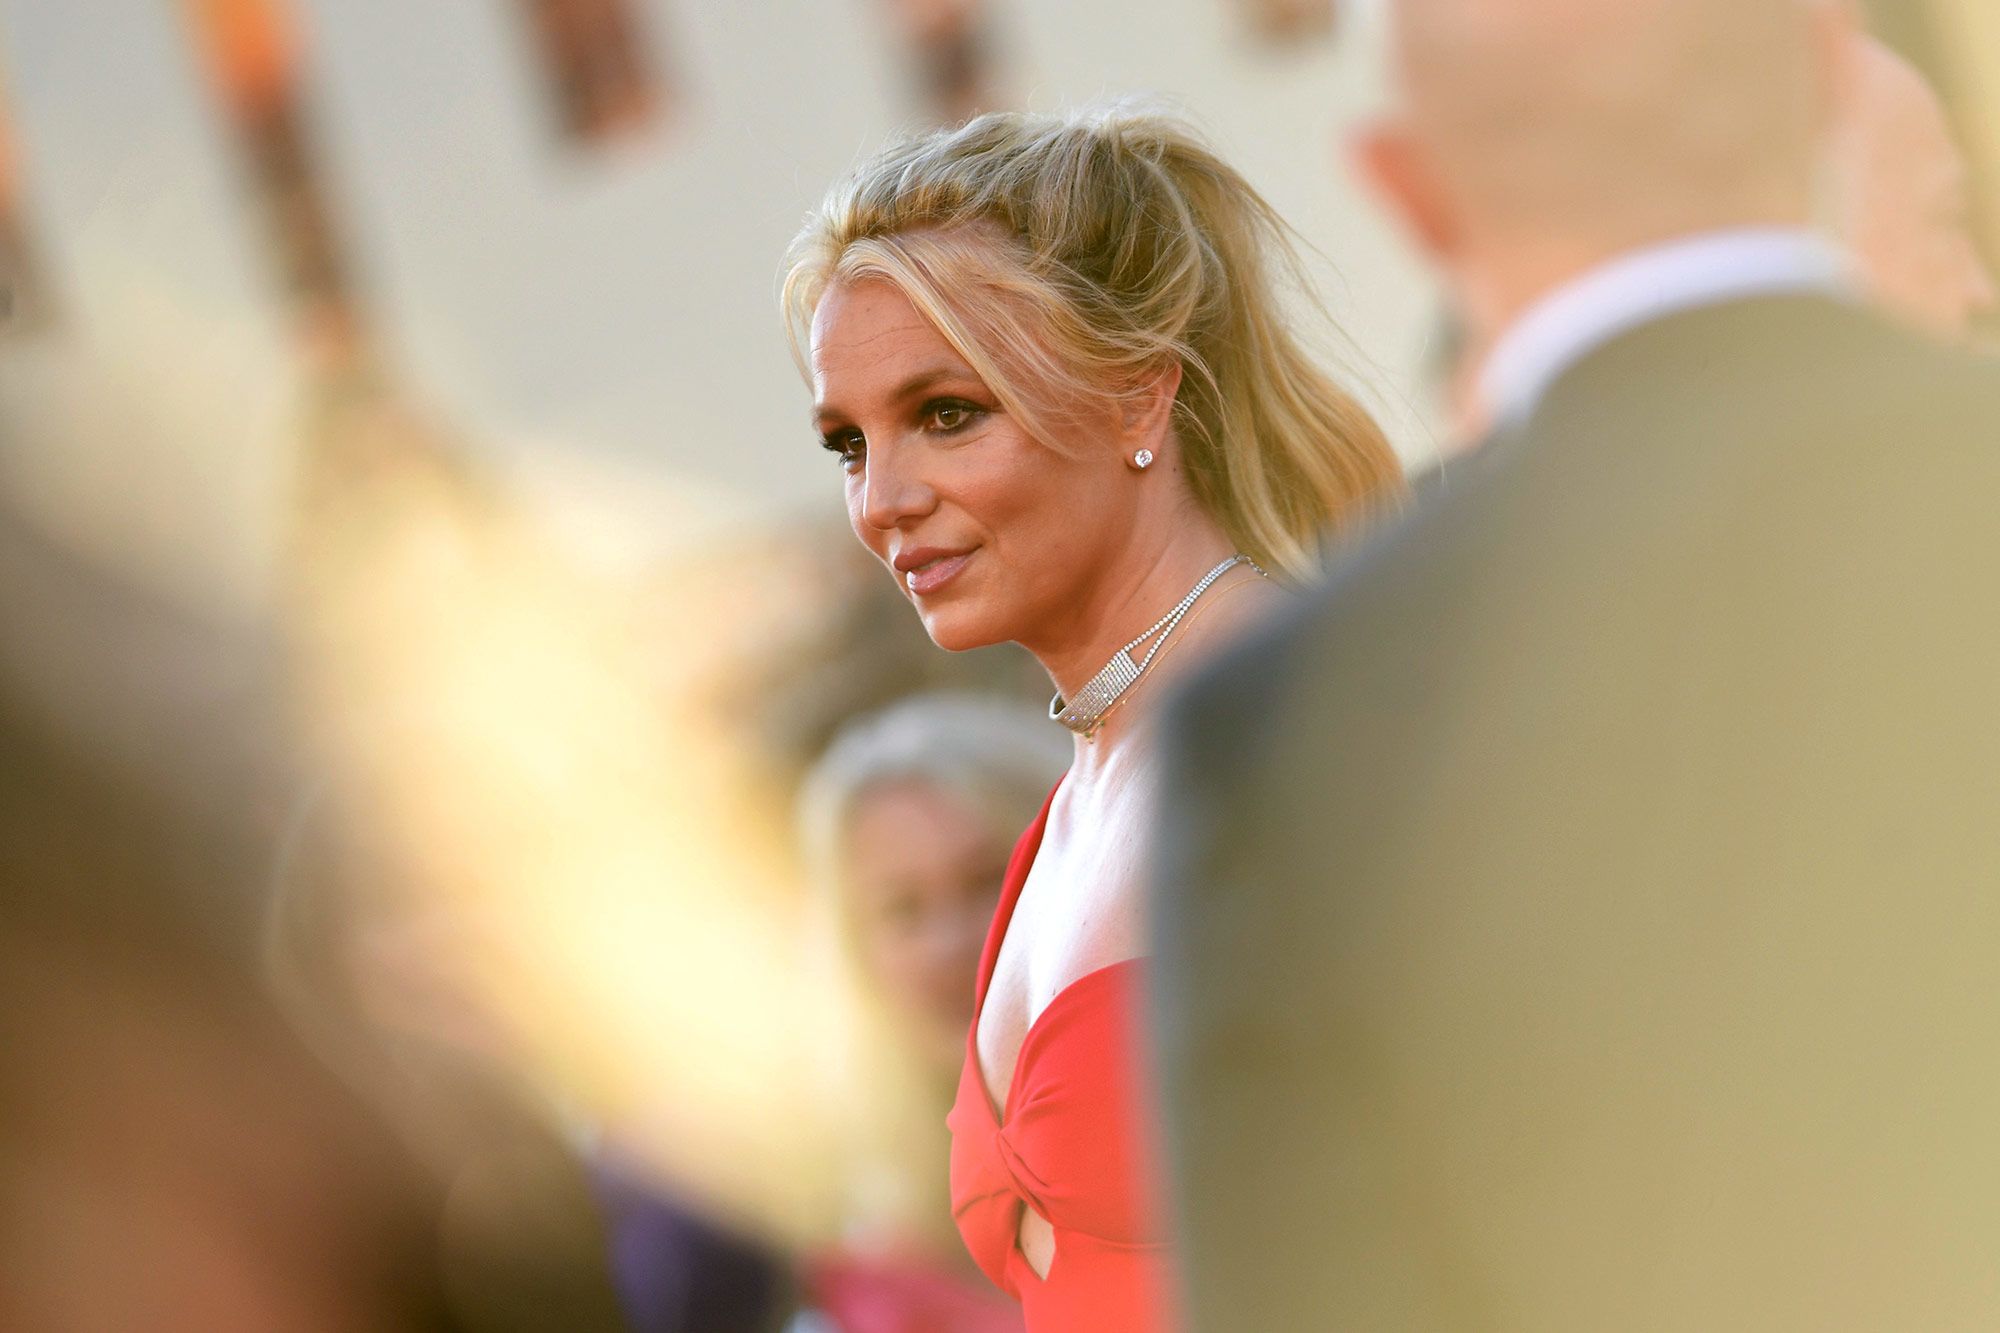 Britney Spears Asks Fans To Respect Her Privacy - Fans Called Police For Welfare Check